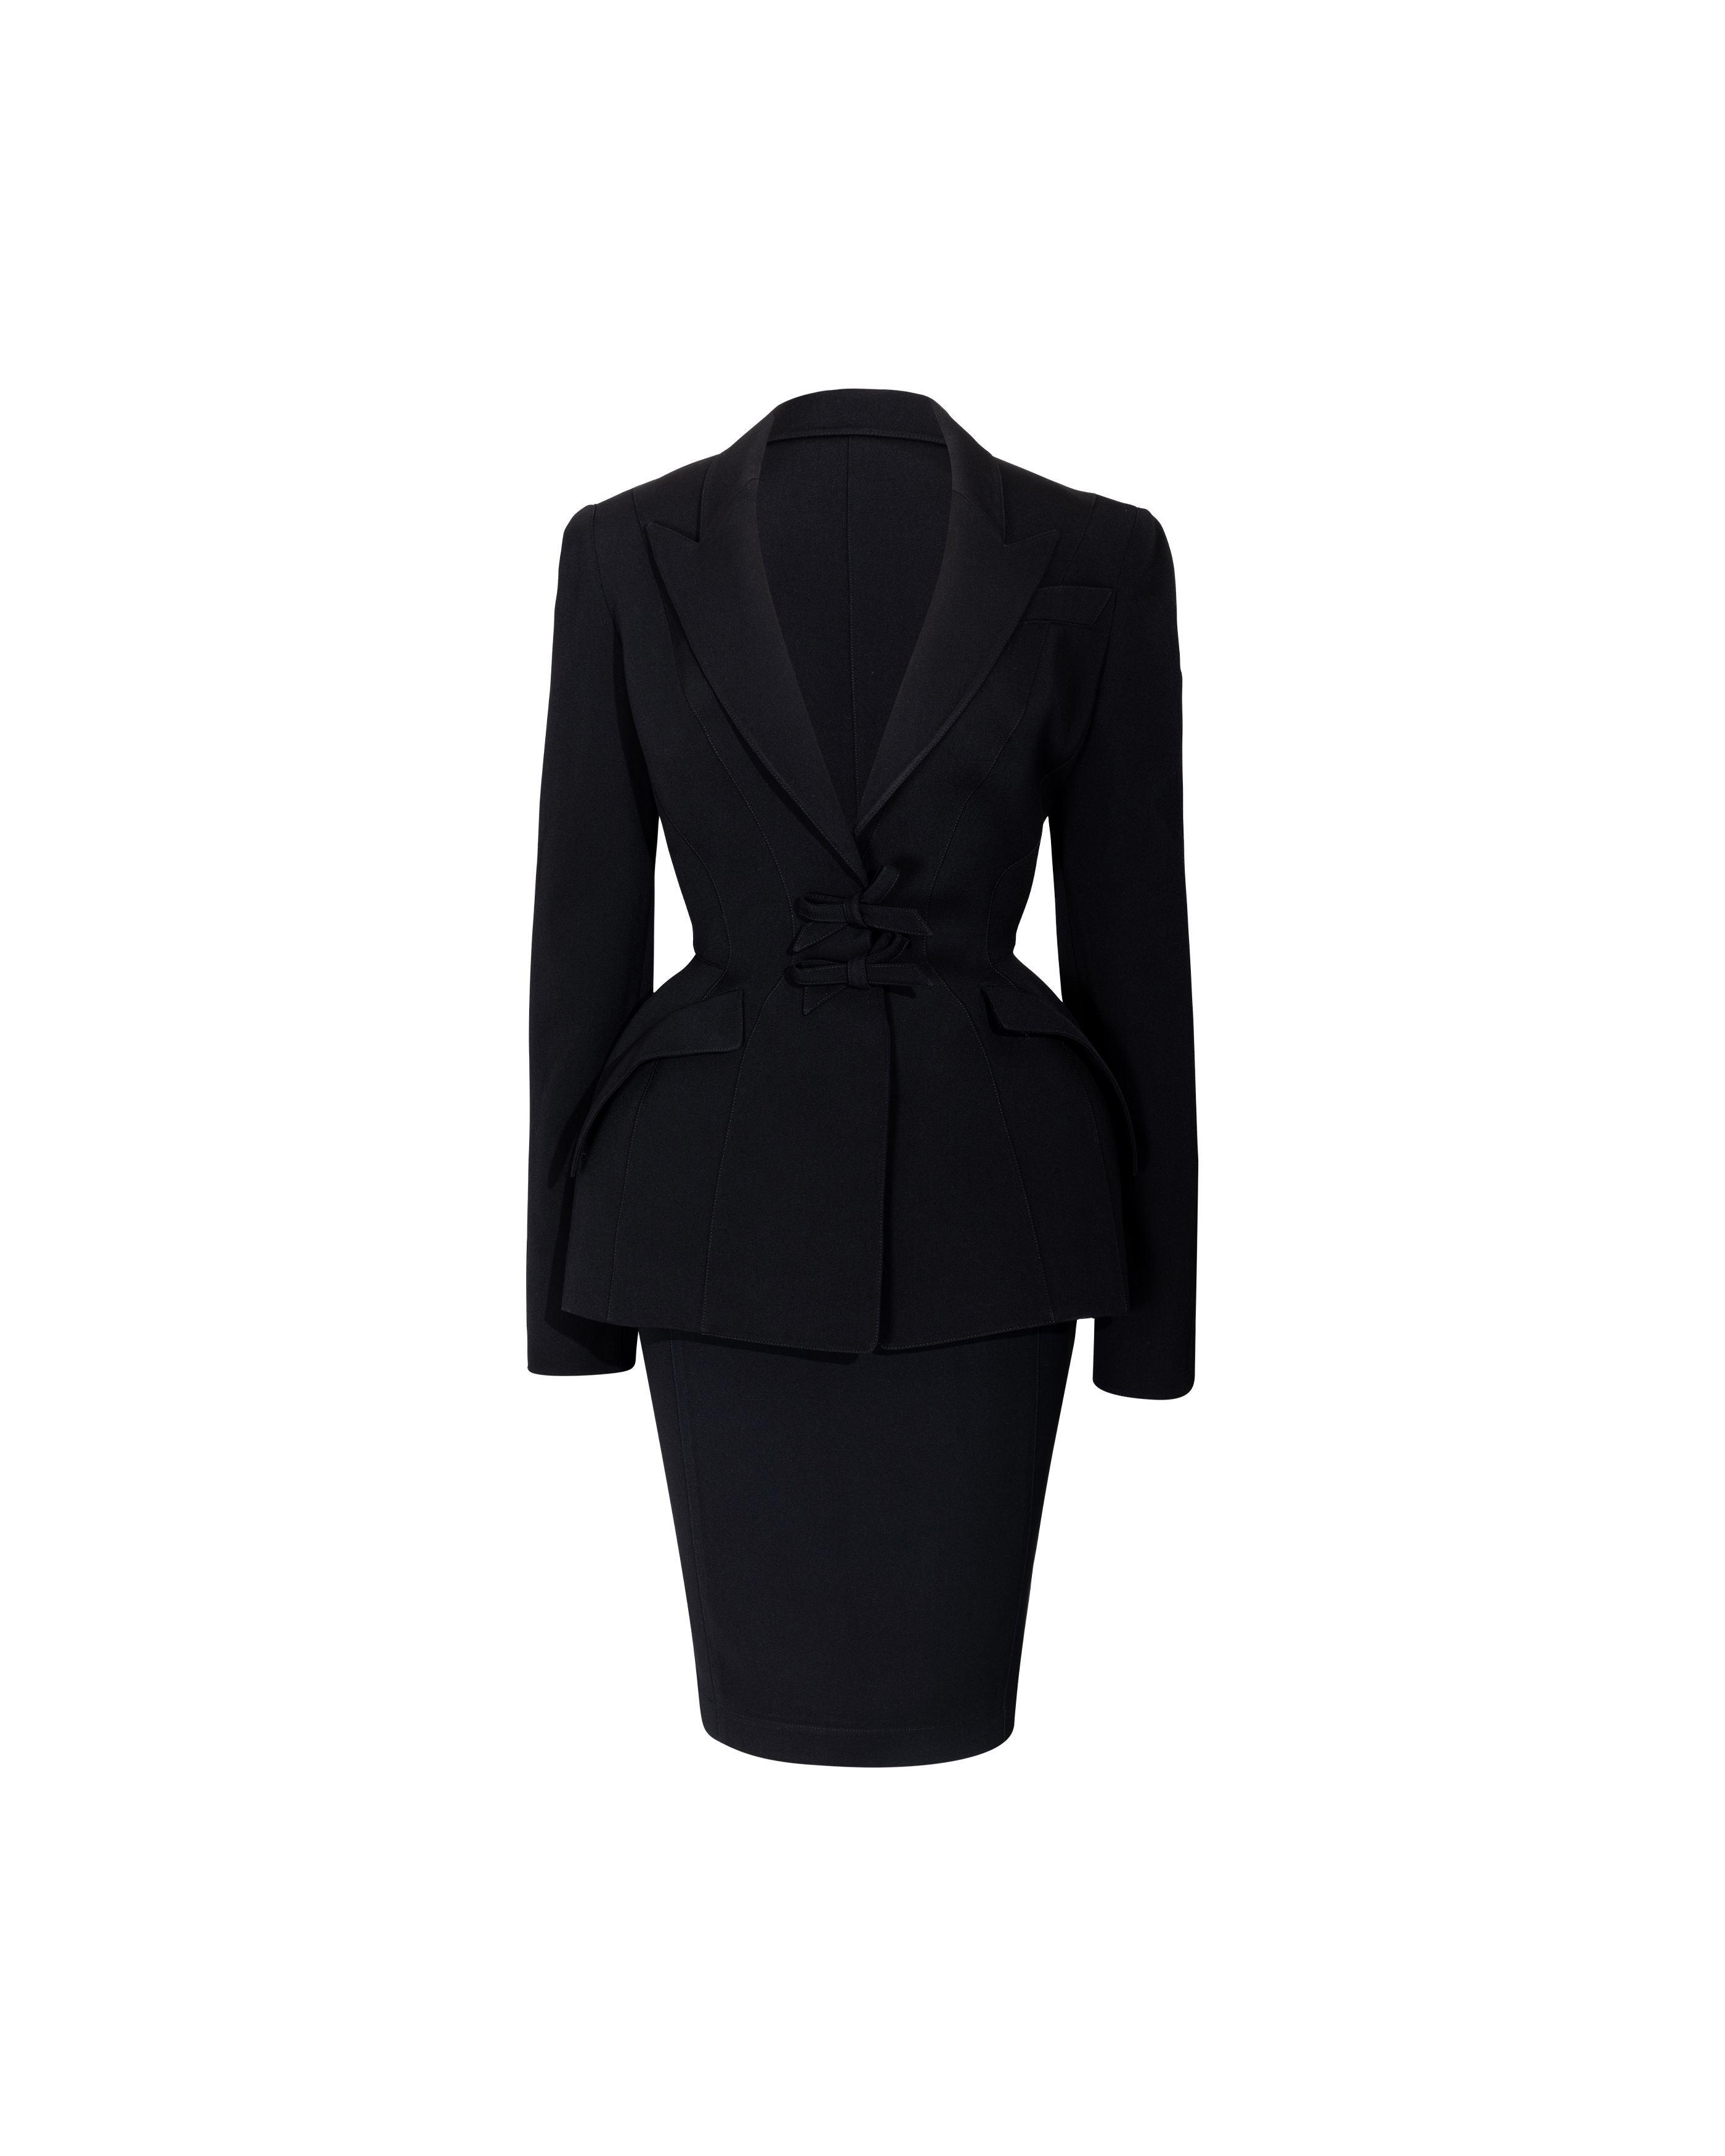 S/S 1992 Black Bow Blazer and Skirt Suit Set